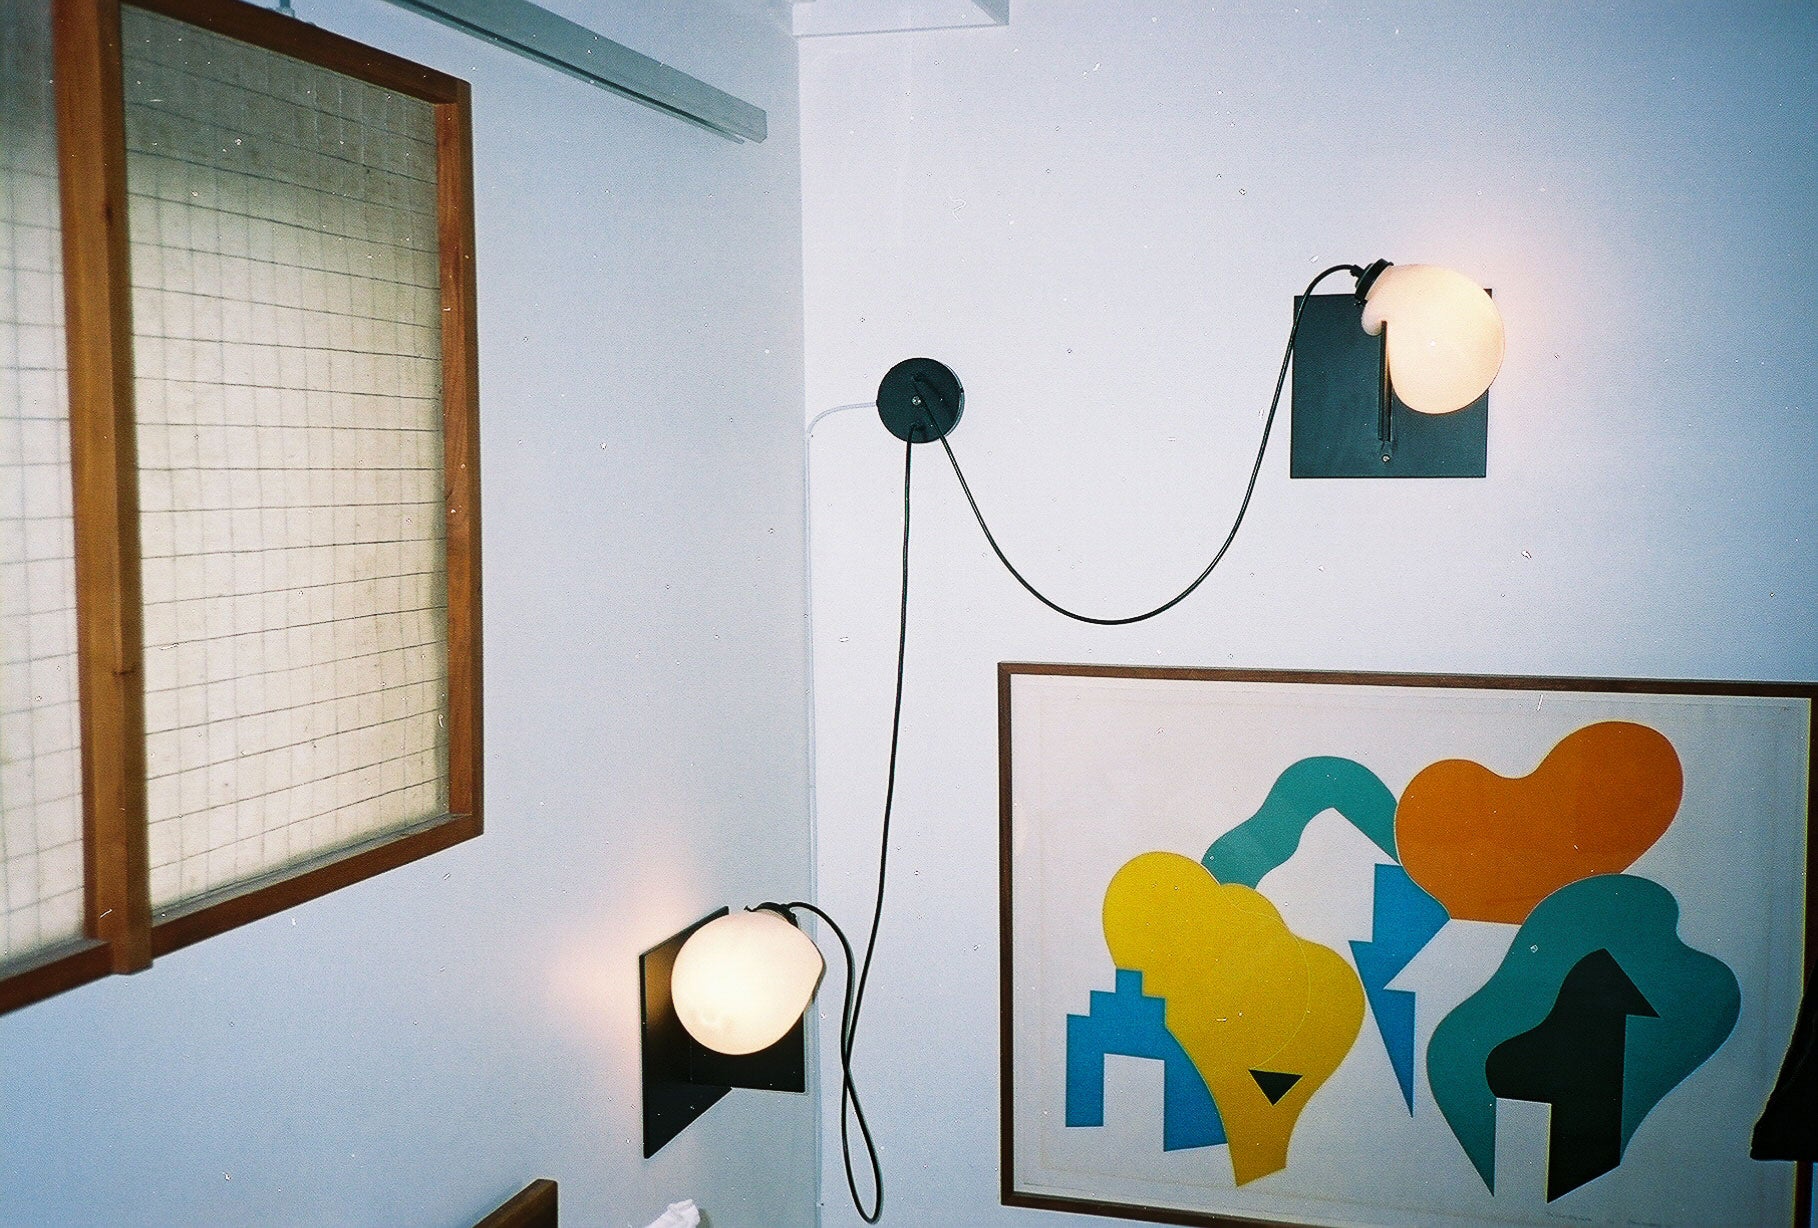 Bloop Sconce mounted on the wall in the corner